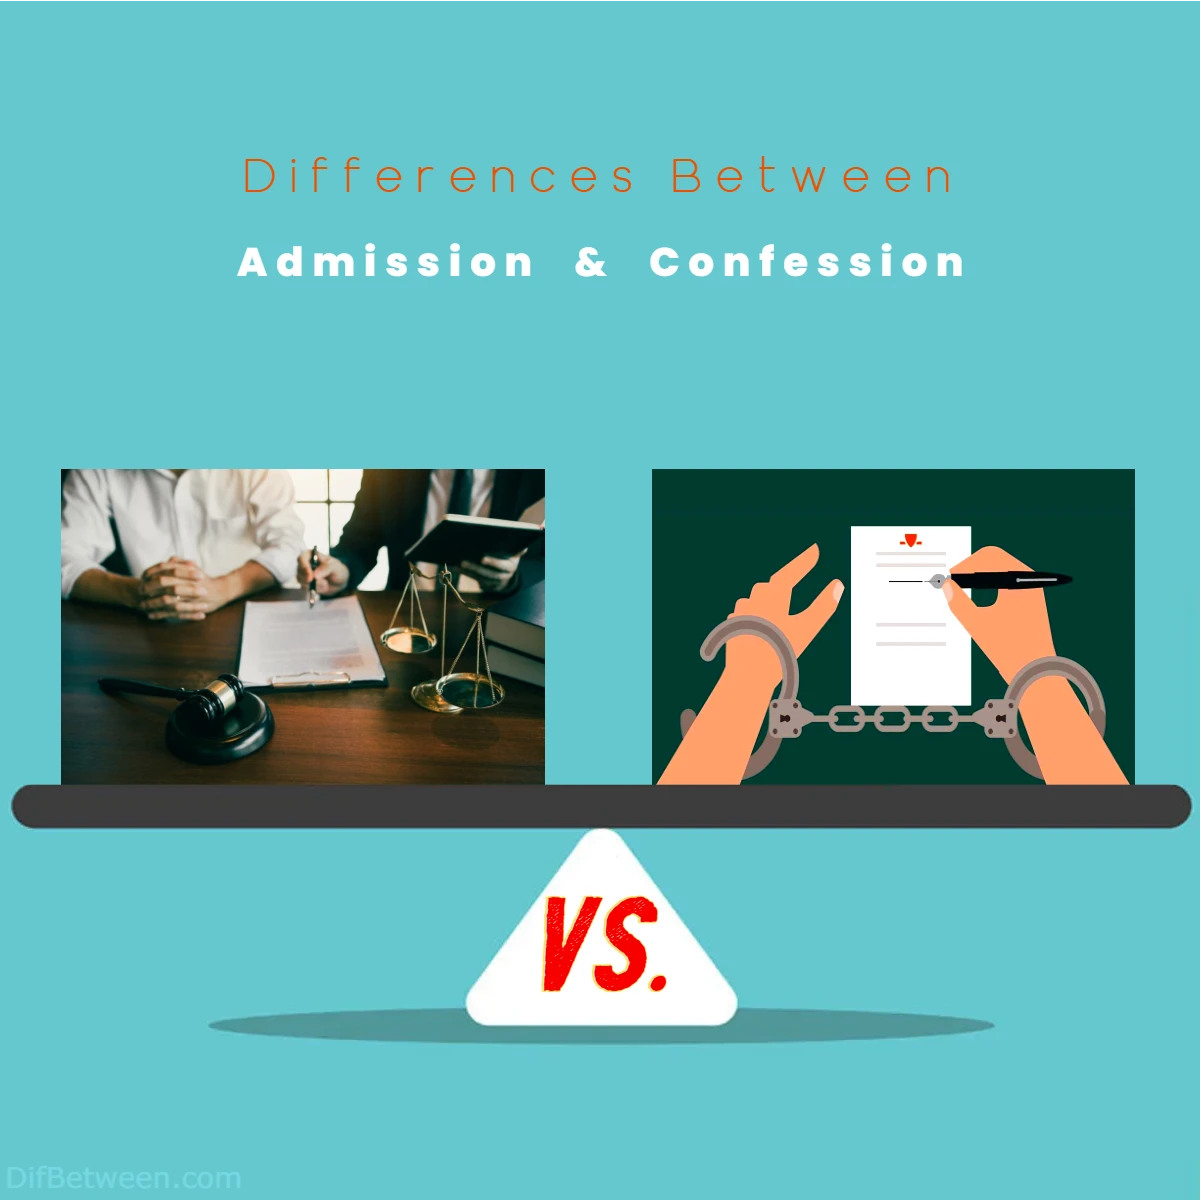 Differences Between Admission vs Confession